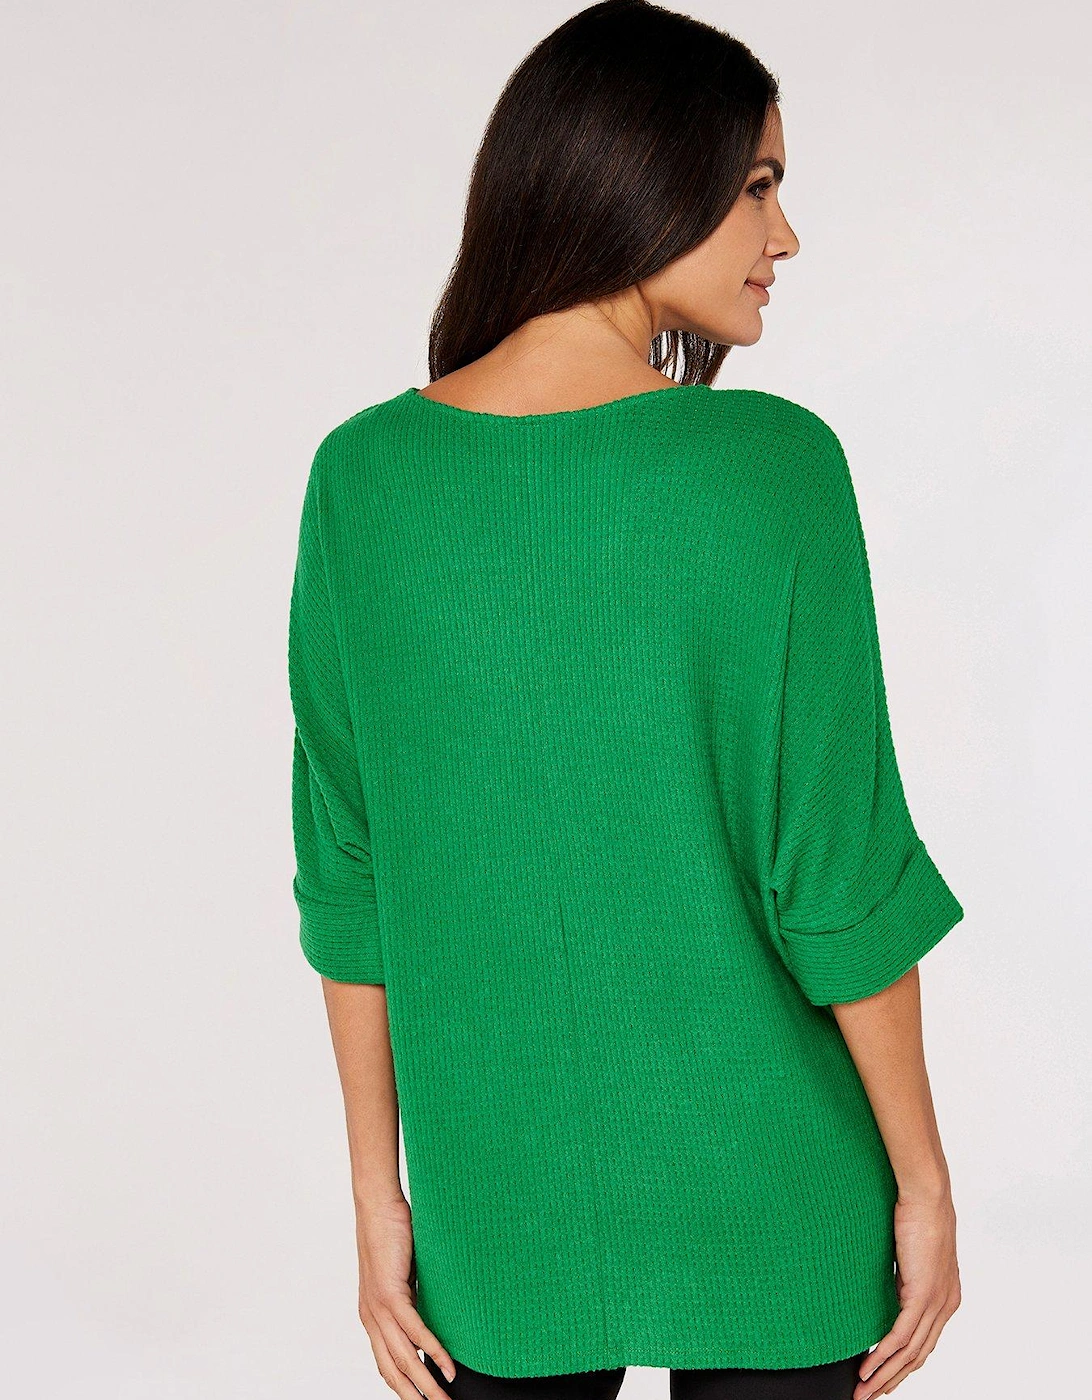 Brushed Waffle Knit Batwing Top